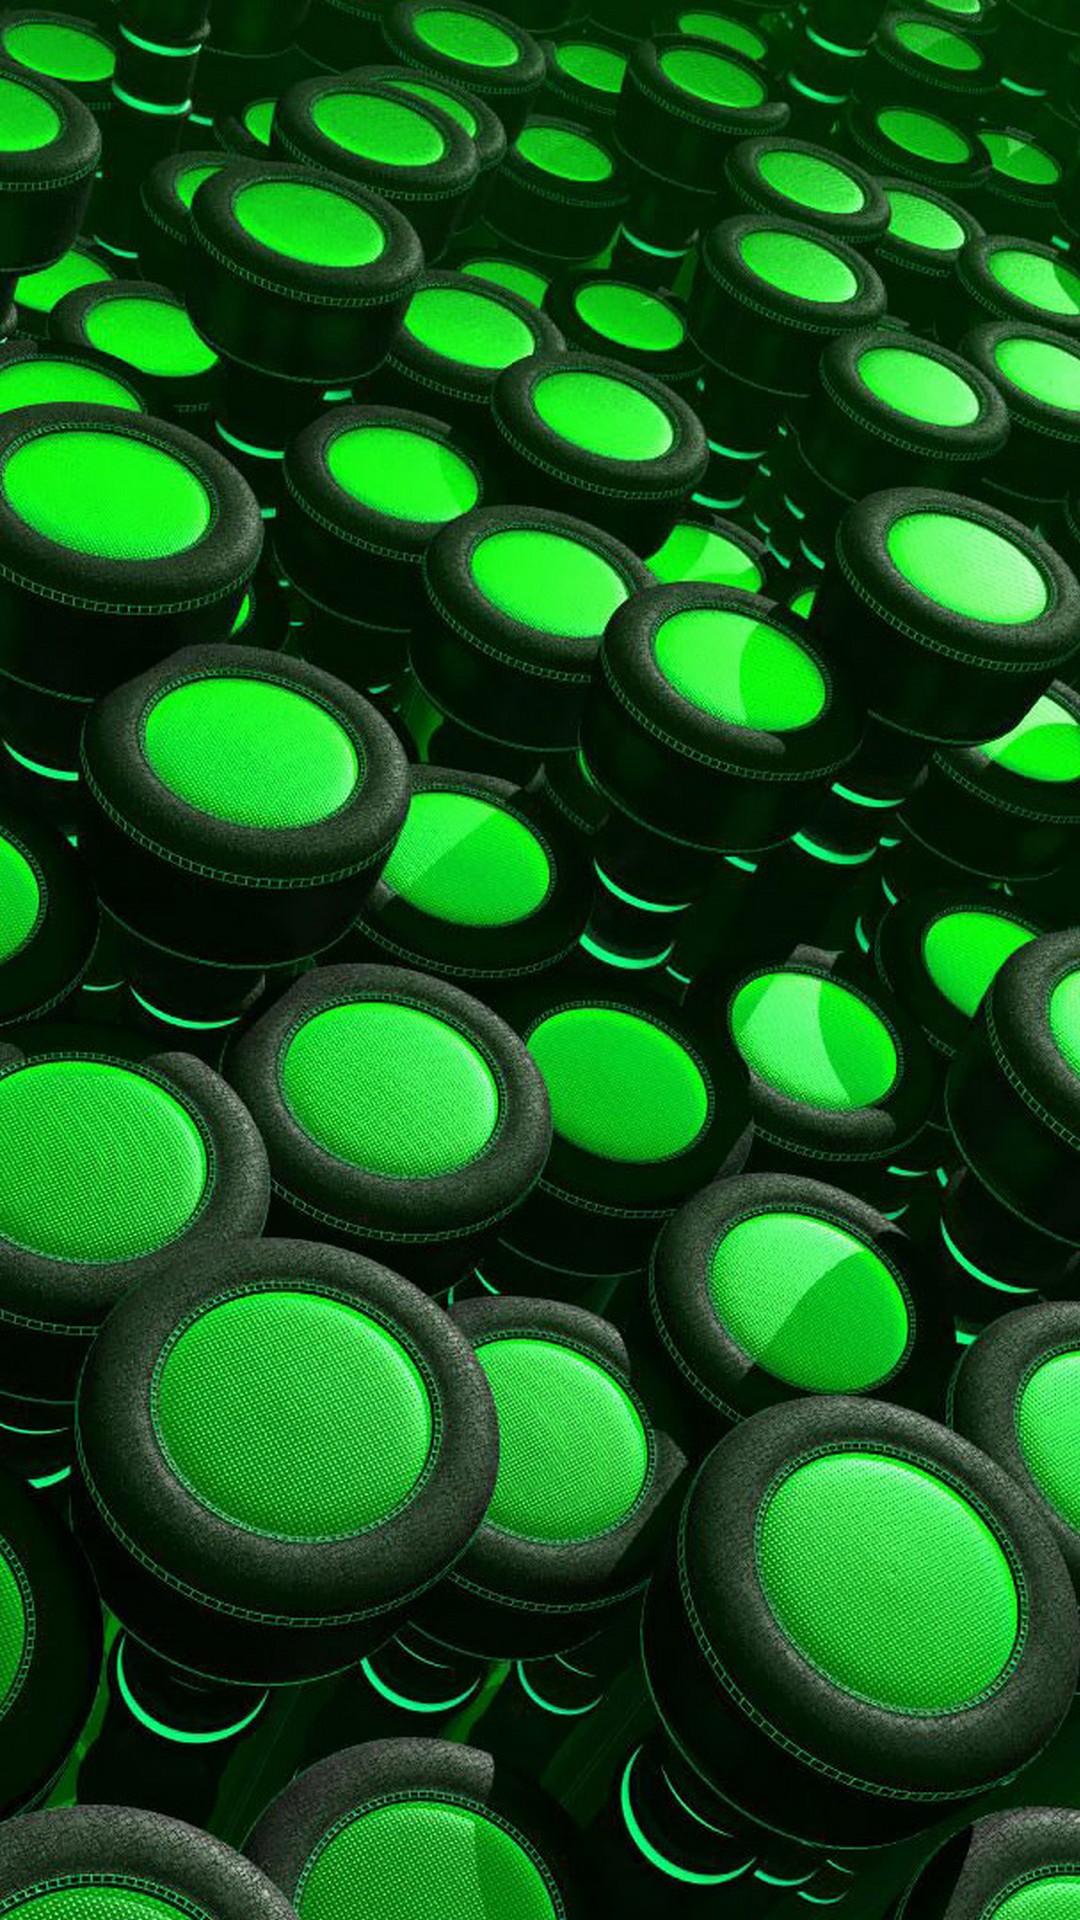 Neon Green Wallpaper Android with resolution 1080X1920 pixel. You can make this wallpaper for your Android backgrounds, Tablet, Smartphones Screensavers and Mobile Phone Lock Screen